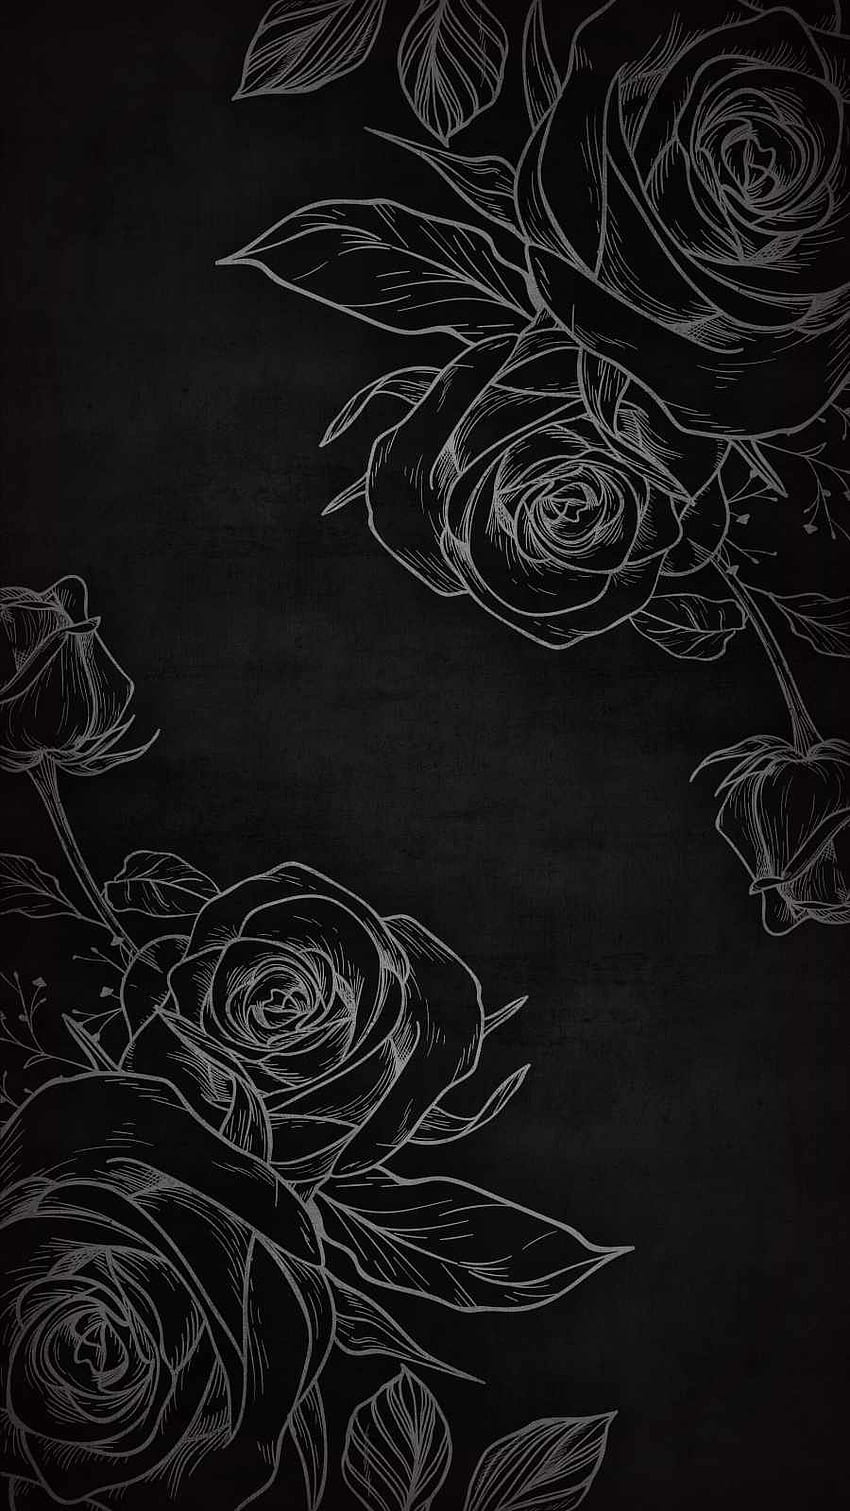 Black Rose Art IPhone - IPhone : iPhone , Black and White Roses ...